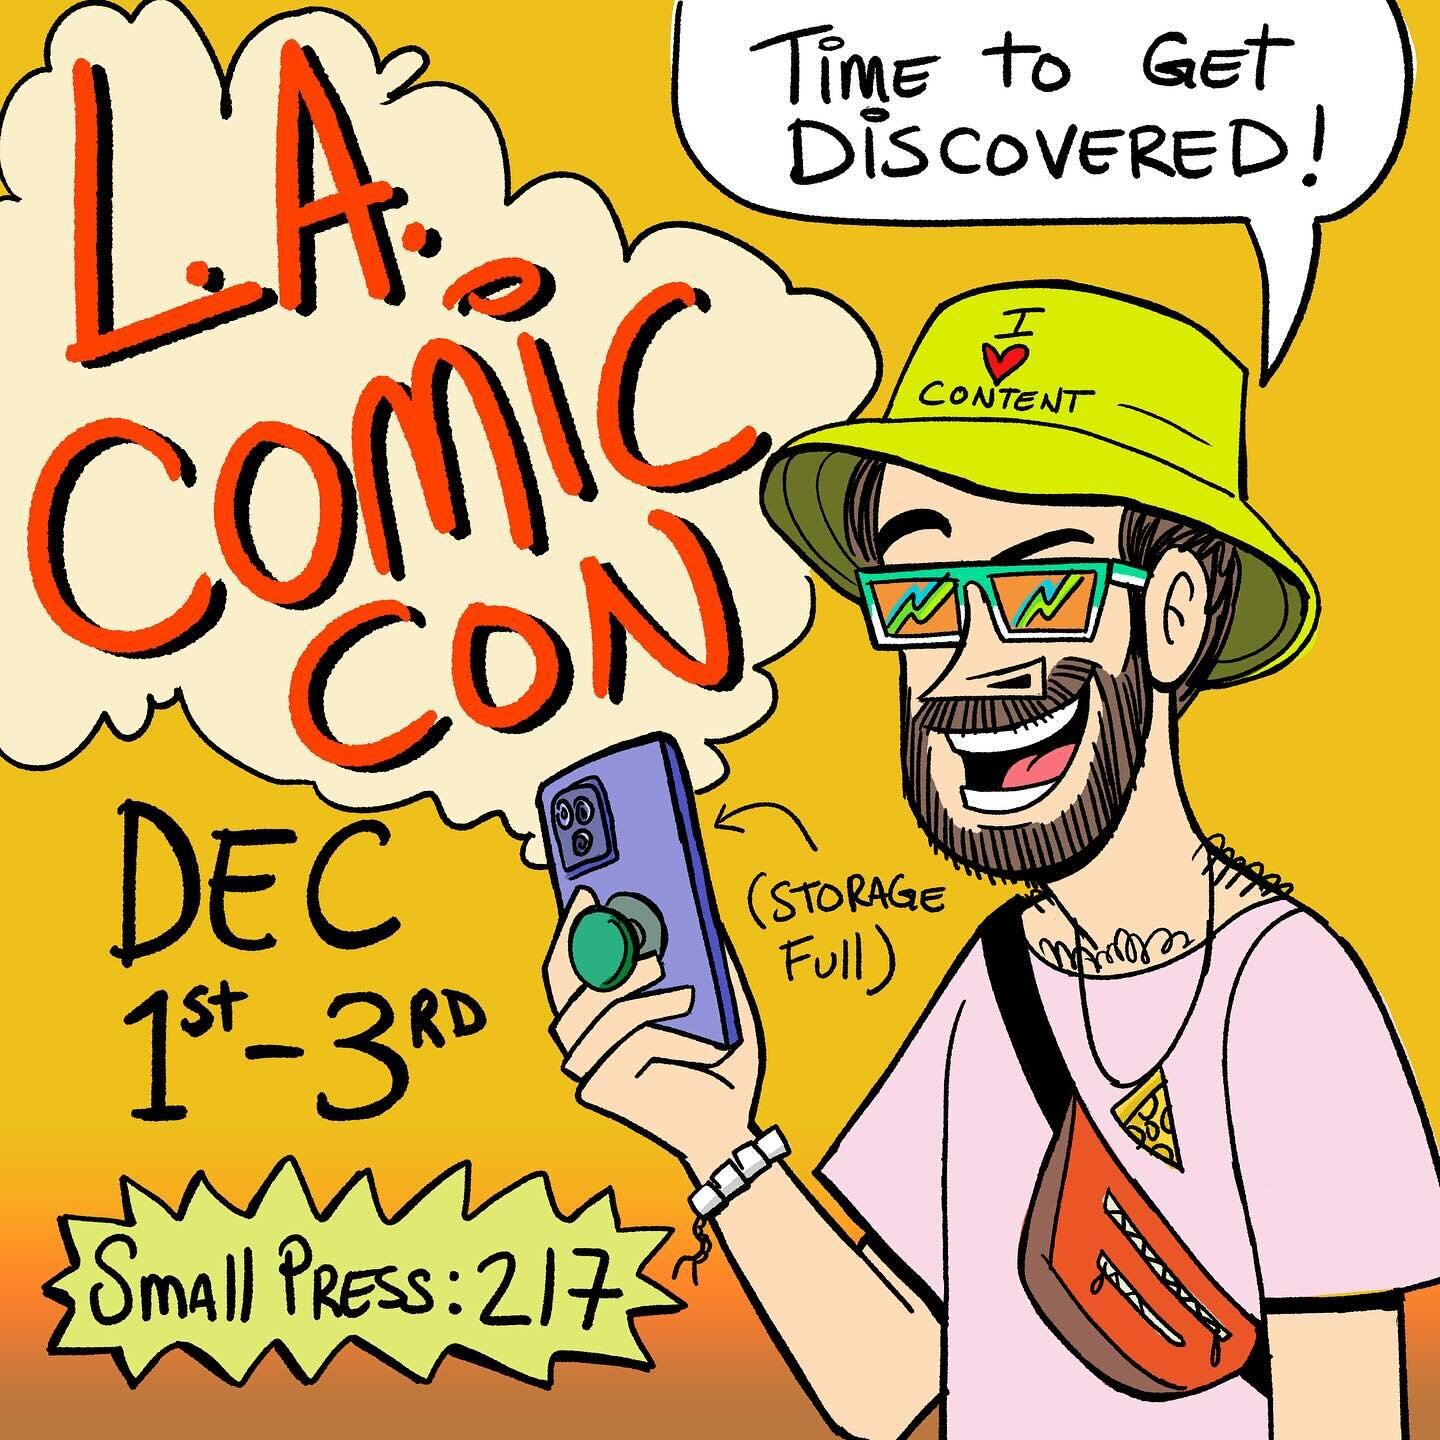 Angelenos!! Come see me this weekend at @comicconla in small press 217!! I will have some EXCLUSIVES as well as books, prints, stickers and the like. Once again, I will be sharing my table with good ol @hannahhillam because we are con-dependent.

I&r